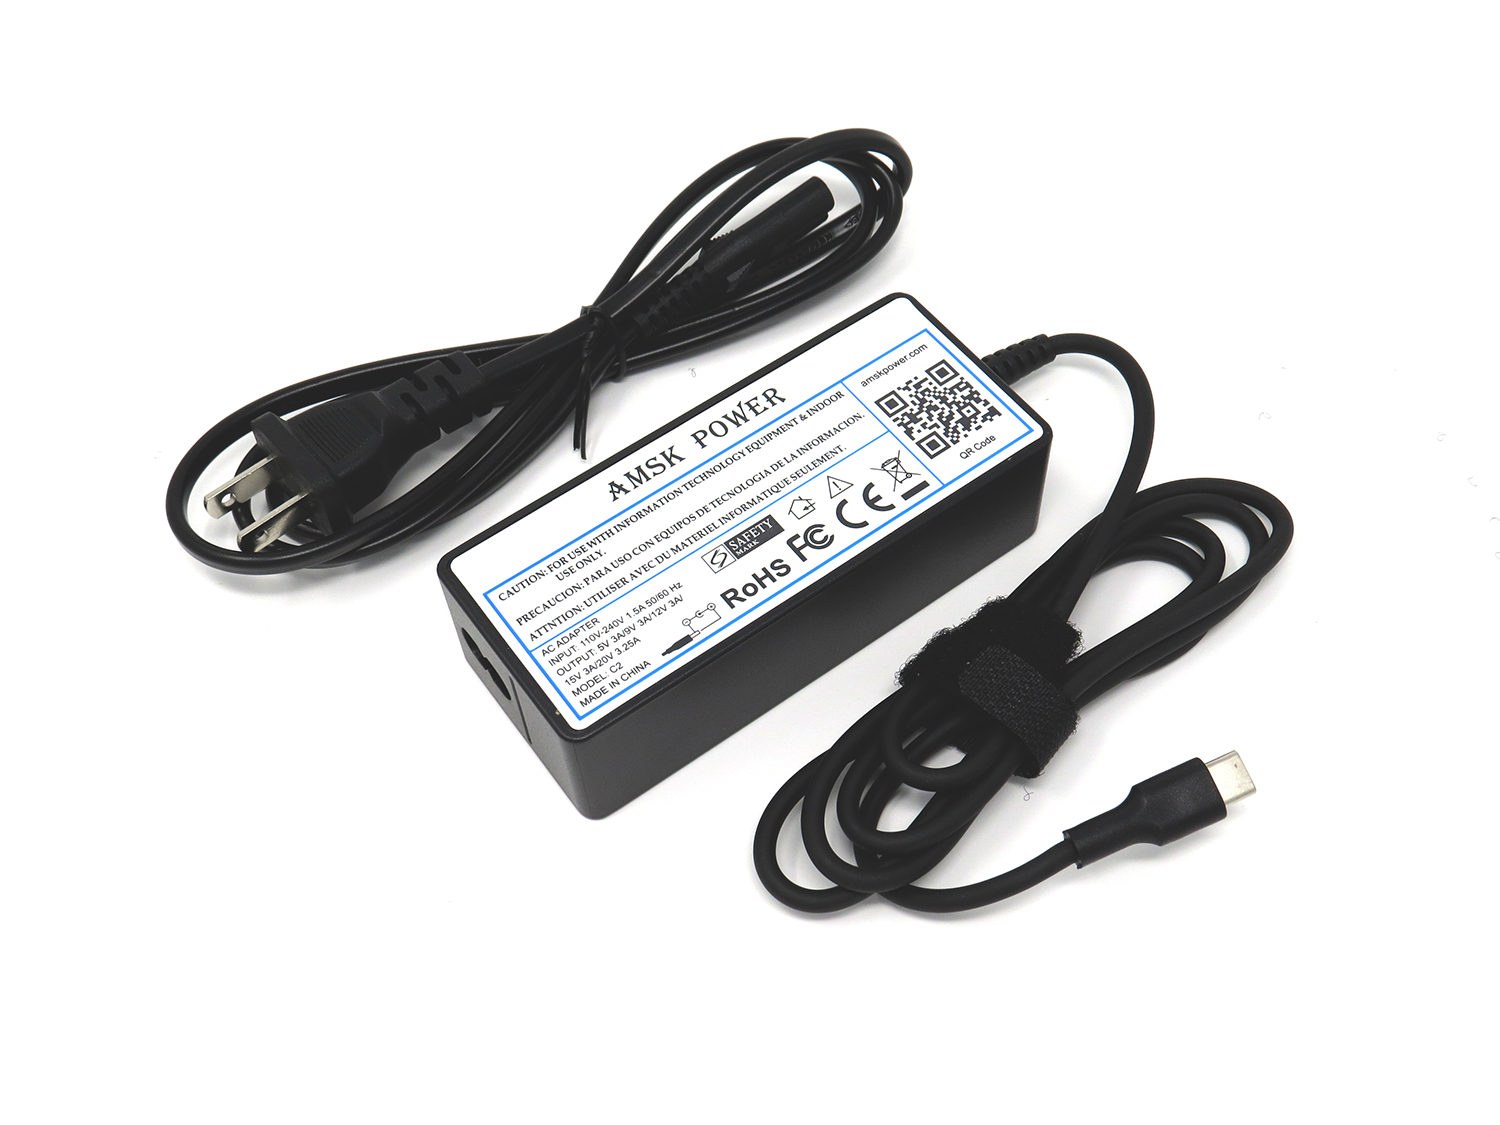 AMSK POWER Ac Adapter 65W Type-C Charger Power Supply For Asus ASUSPRO B9440UA-XS51 Laptop - image 1 of 1